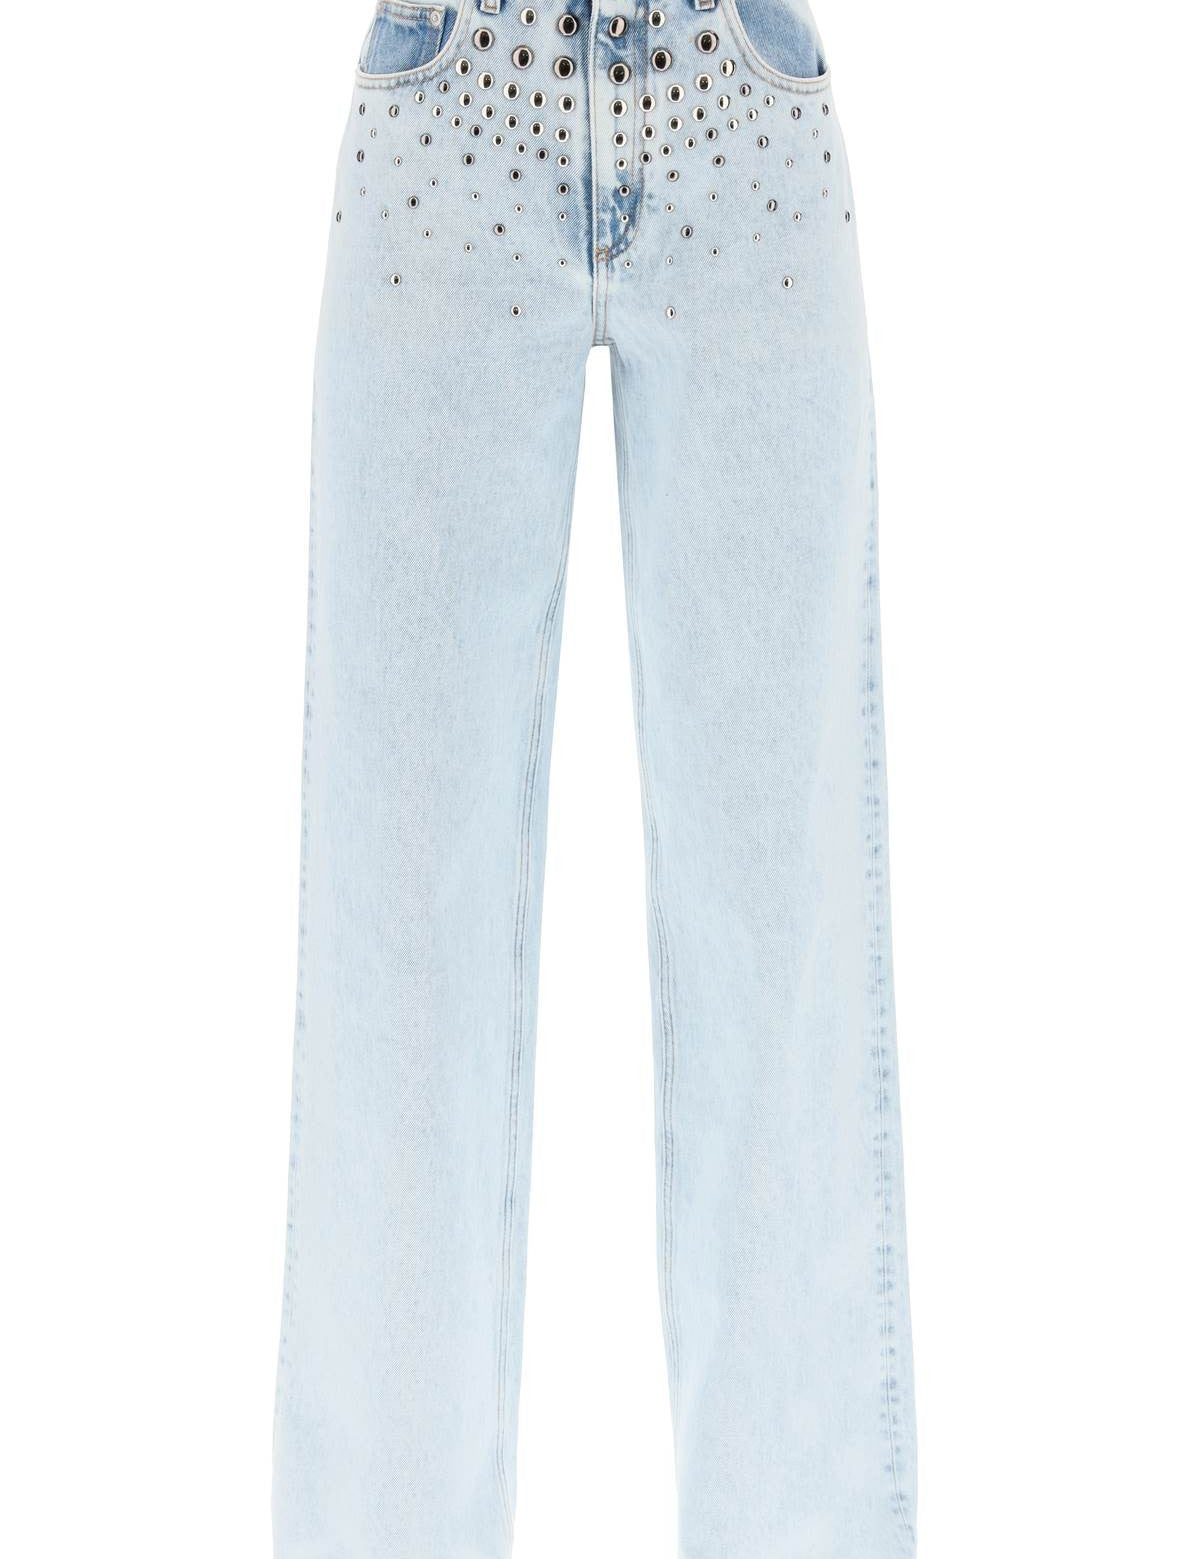 alessandra-rich-jeans-with-studs.jpg